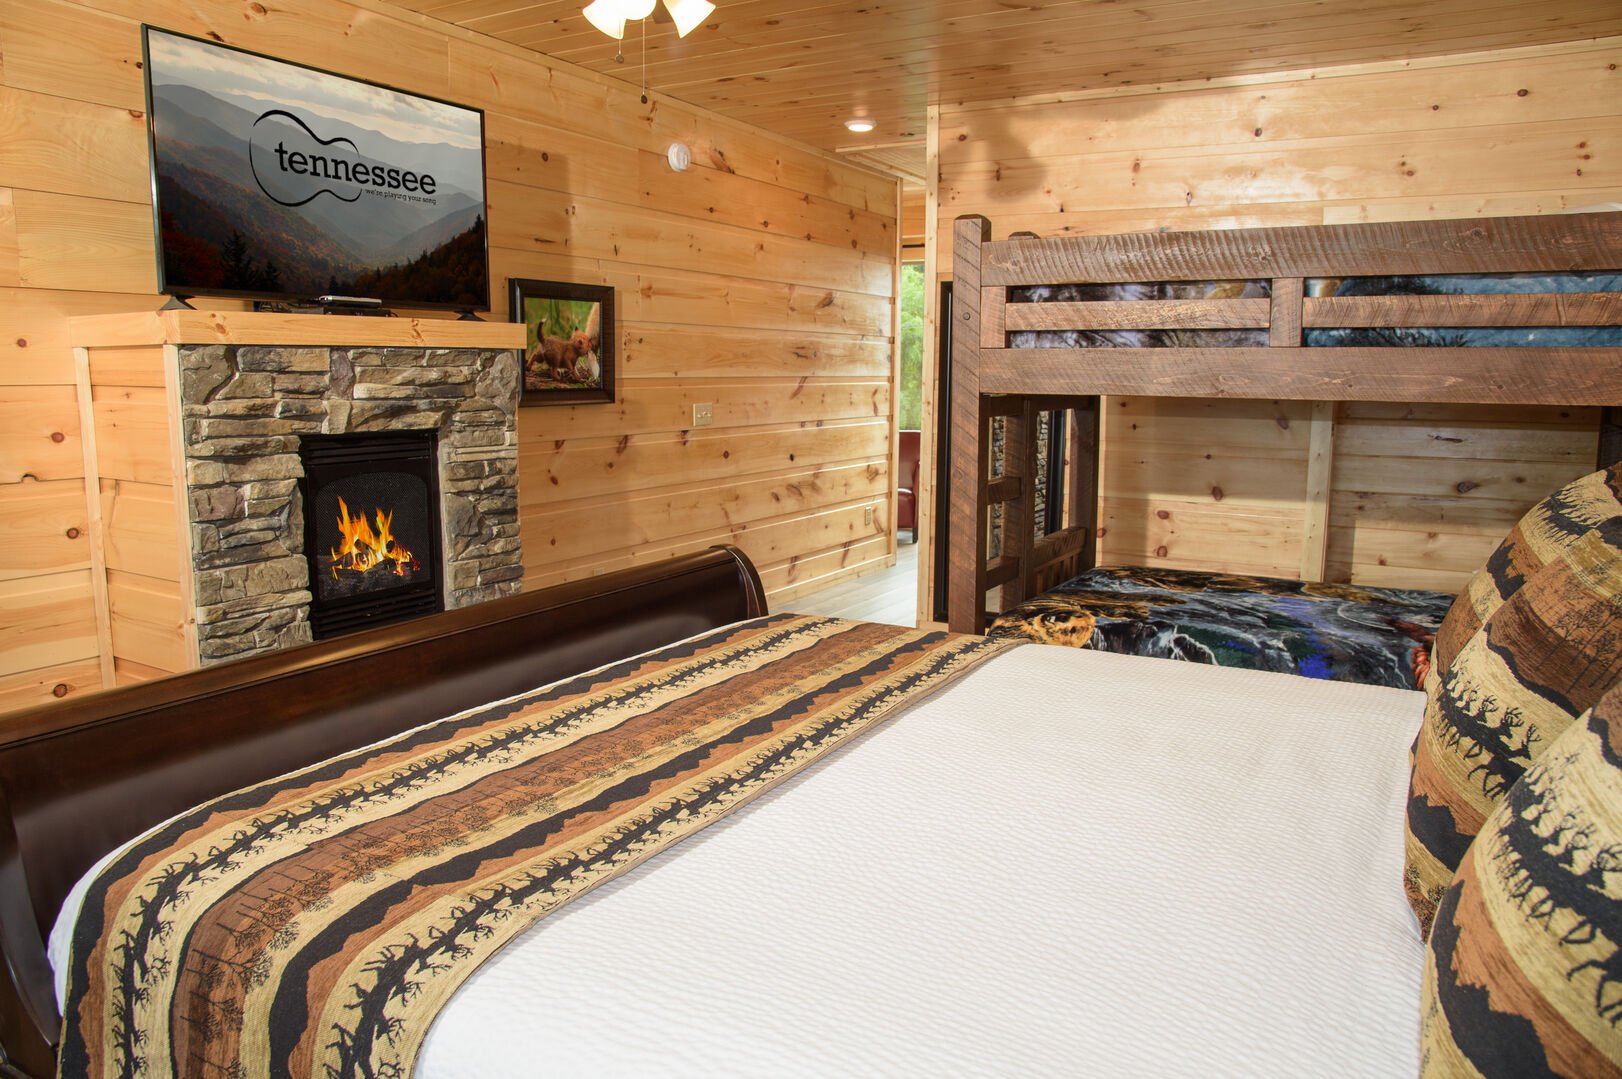 Bedroom with TV, Fireplace, Bunk Beds king size beds, & private bathroom